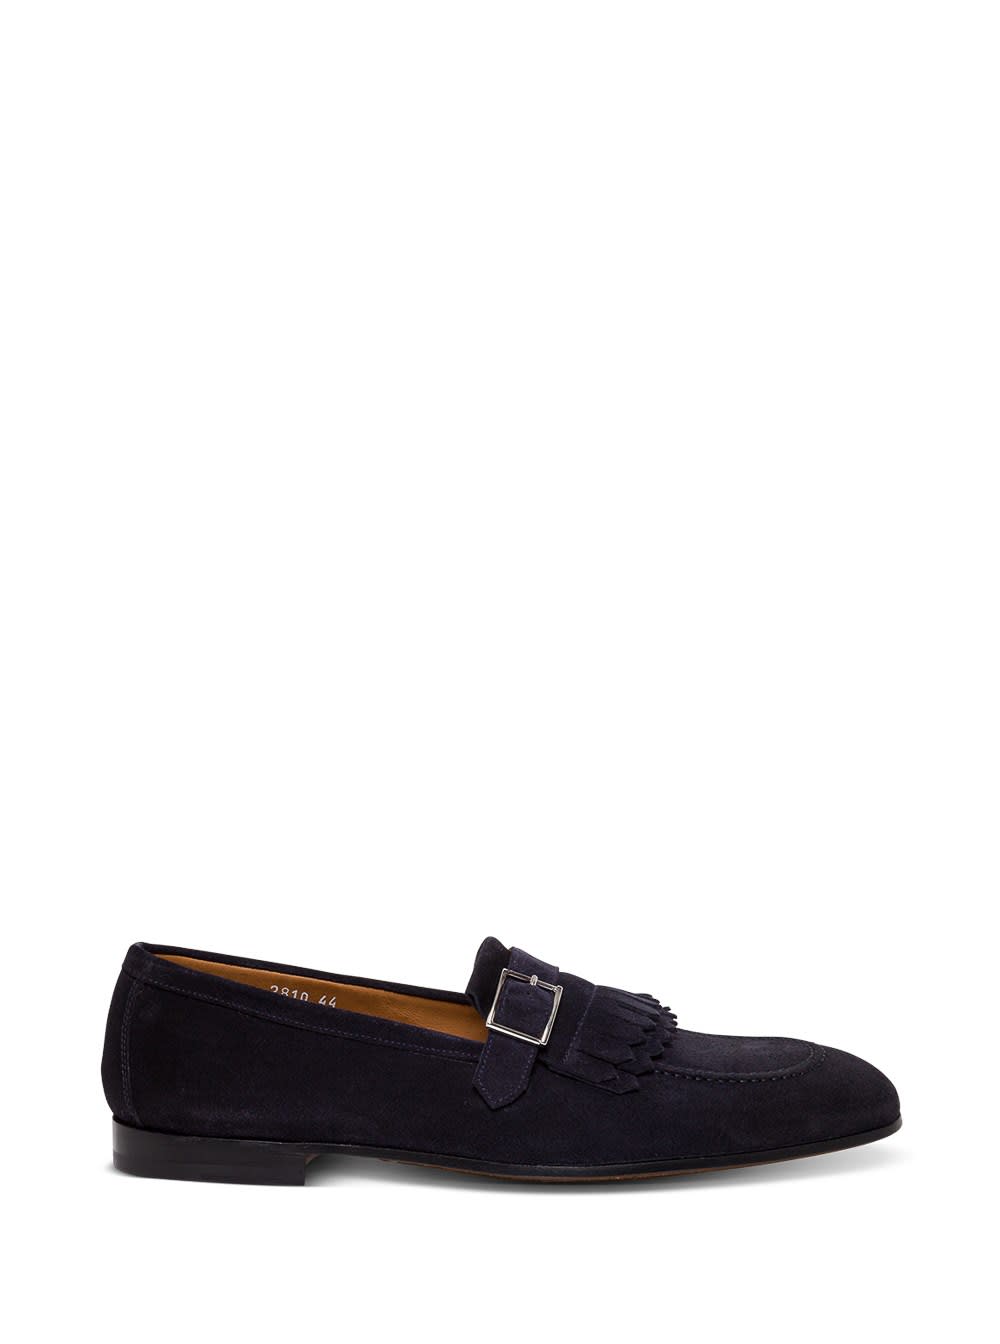 Doucals Blue Suede Loafers